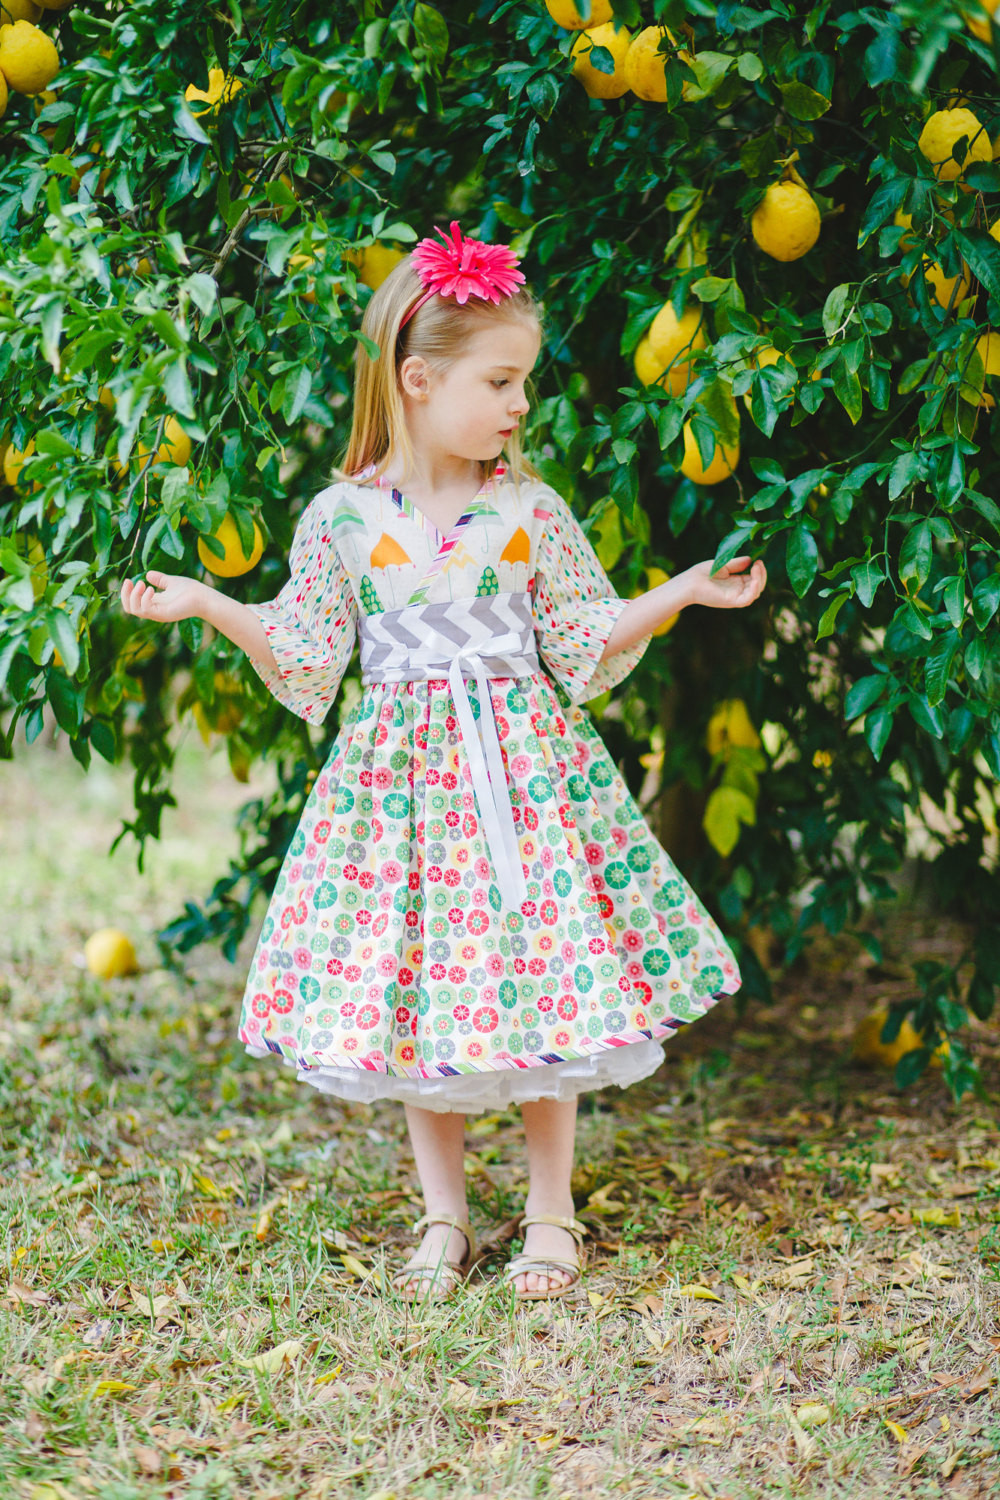 Tea Party Dresses For Kids
 Girls Birthday Dress Toddler Party Dress Tea by PinkMouseKids